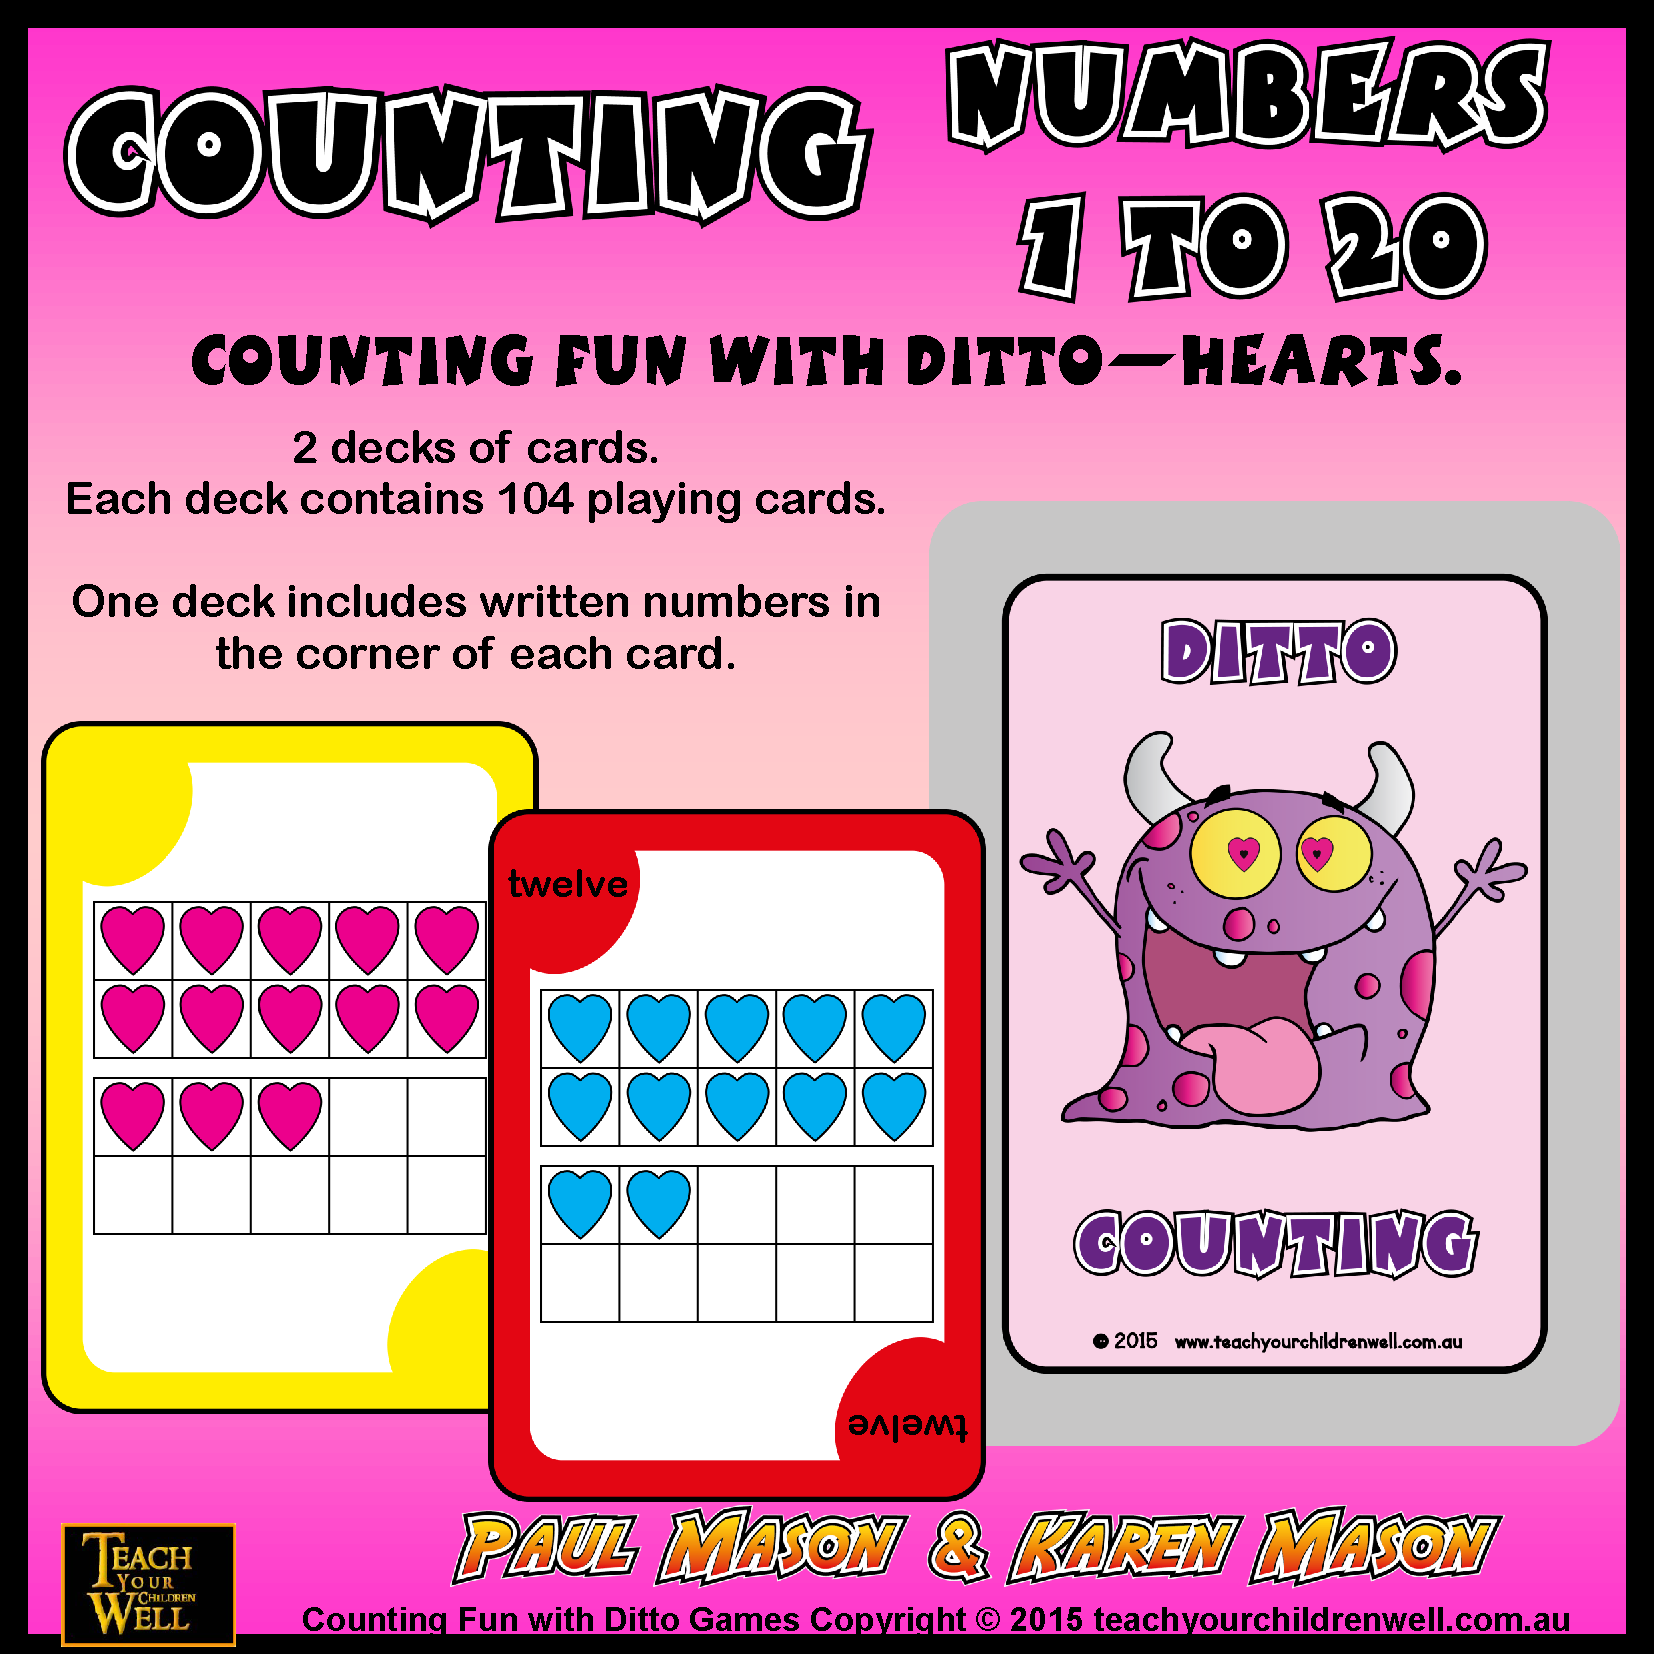 COUNTING NUMBERS 1 TO 20 WITH DITTO - HEARTS